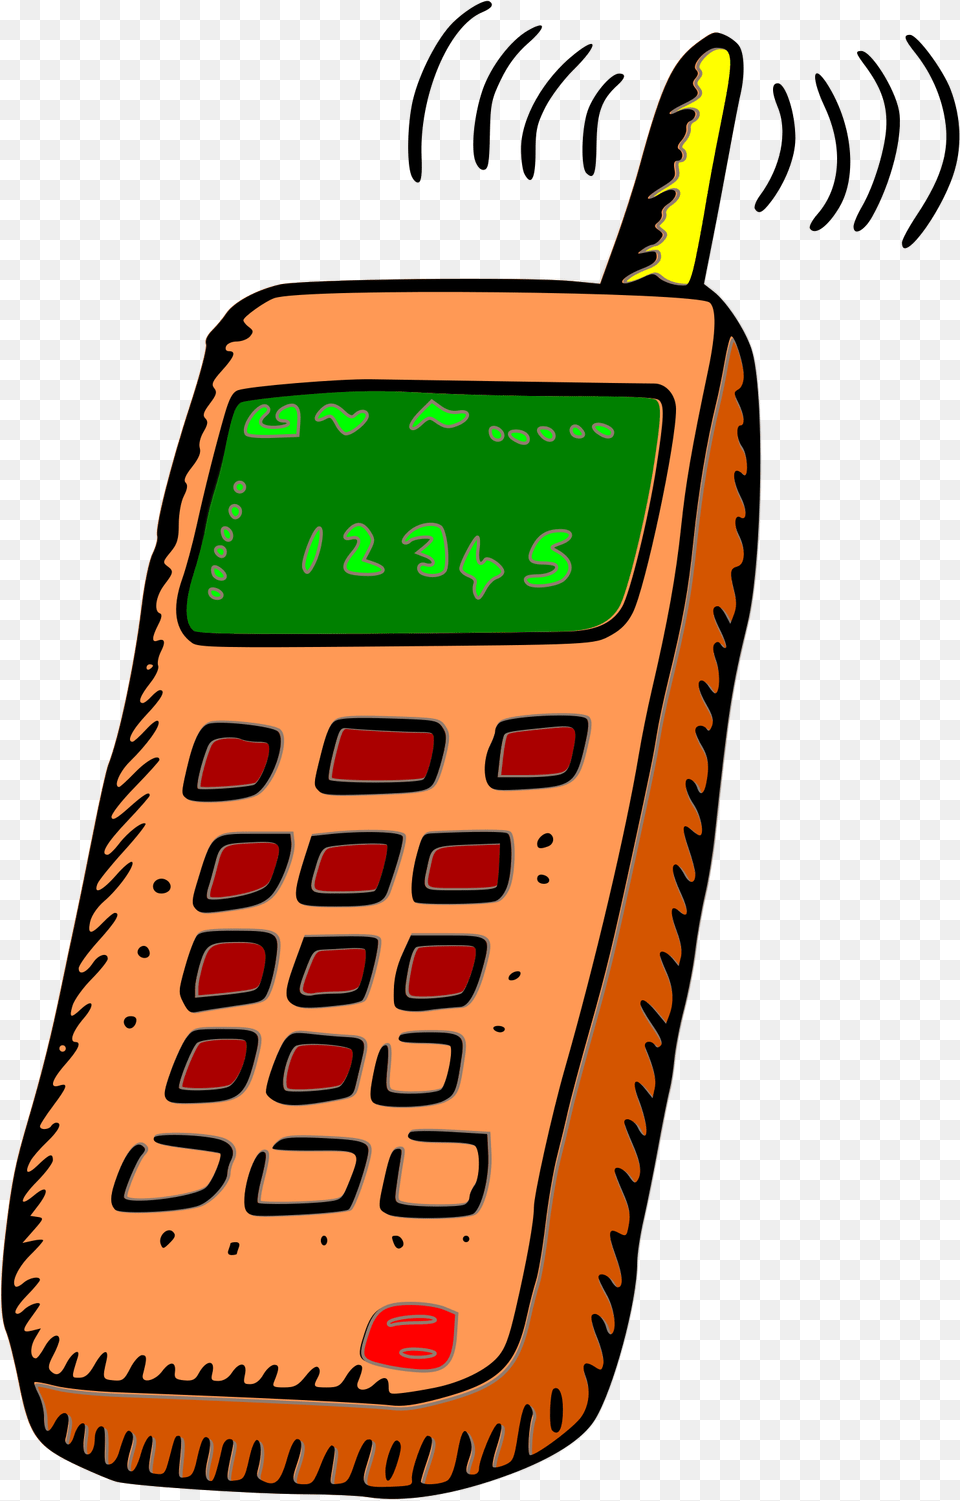 This Icons Design Of Analogue Mobile Phone, Electronics, Mobile Phone Png Image